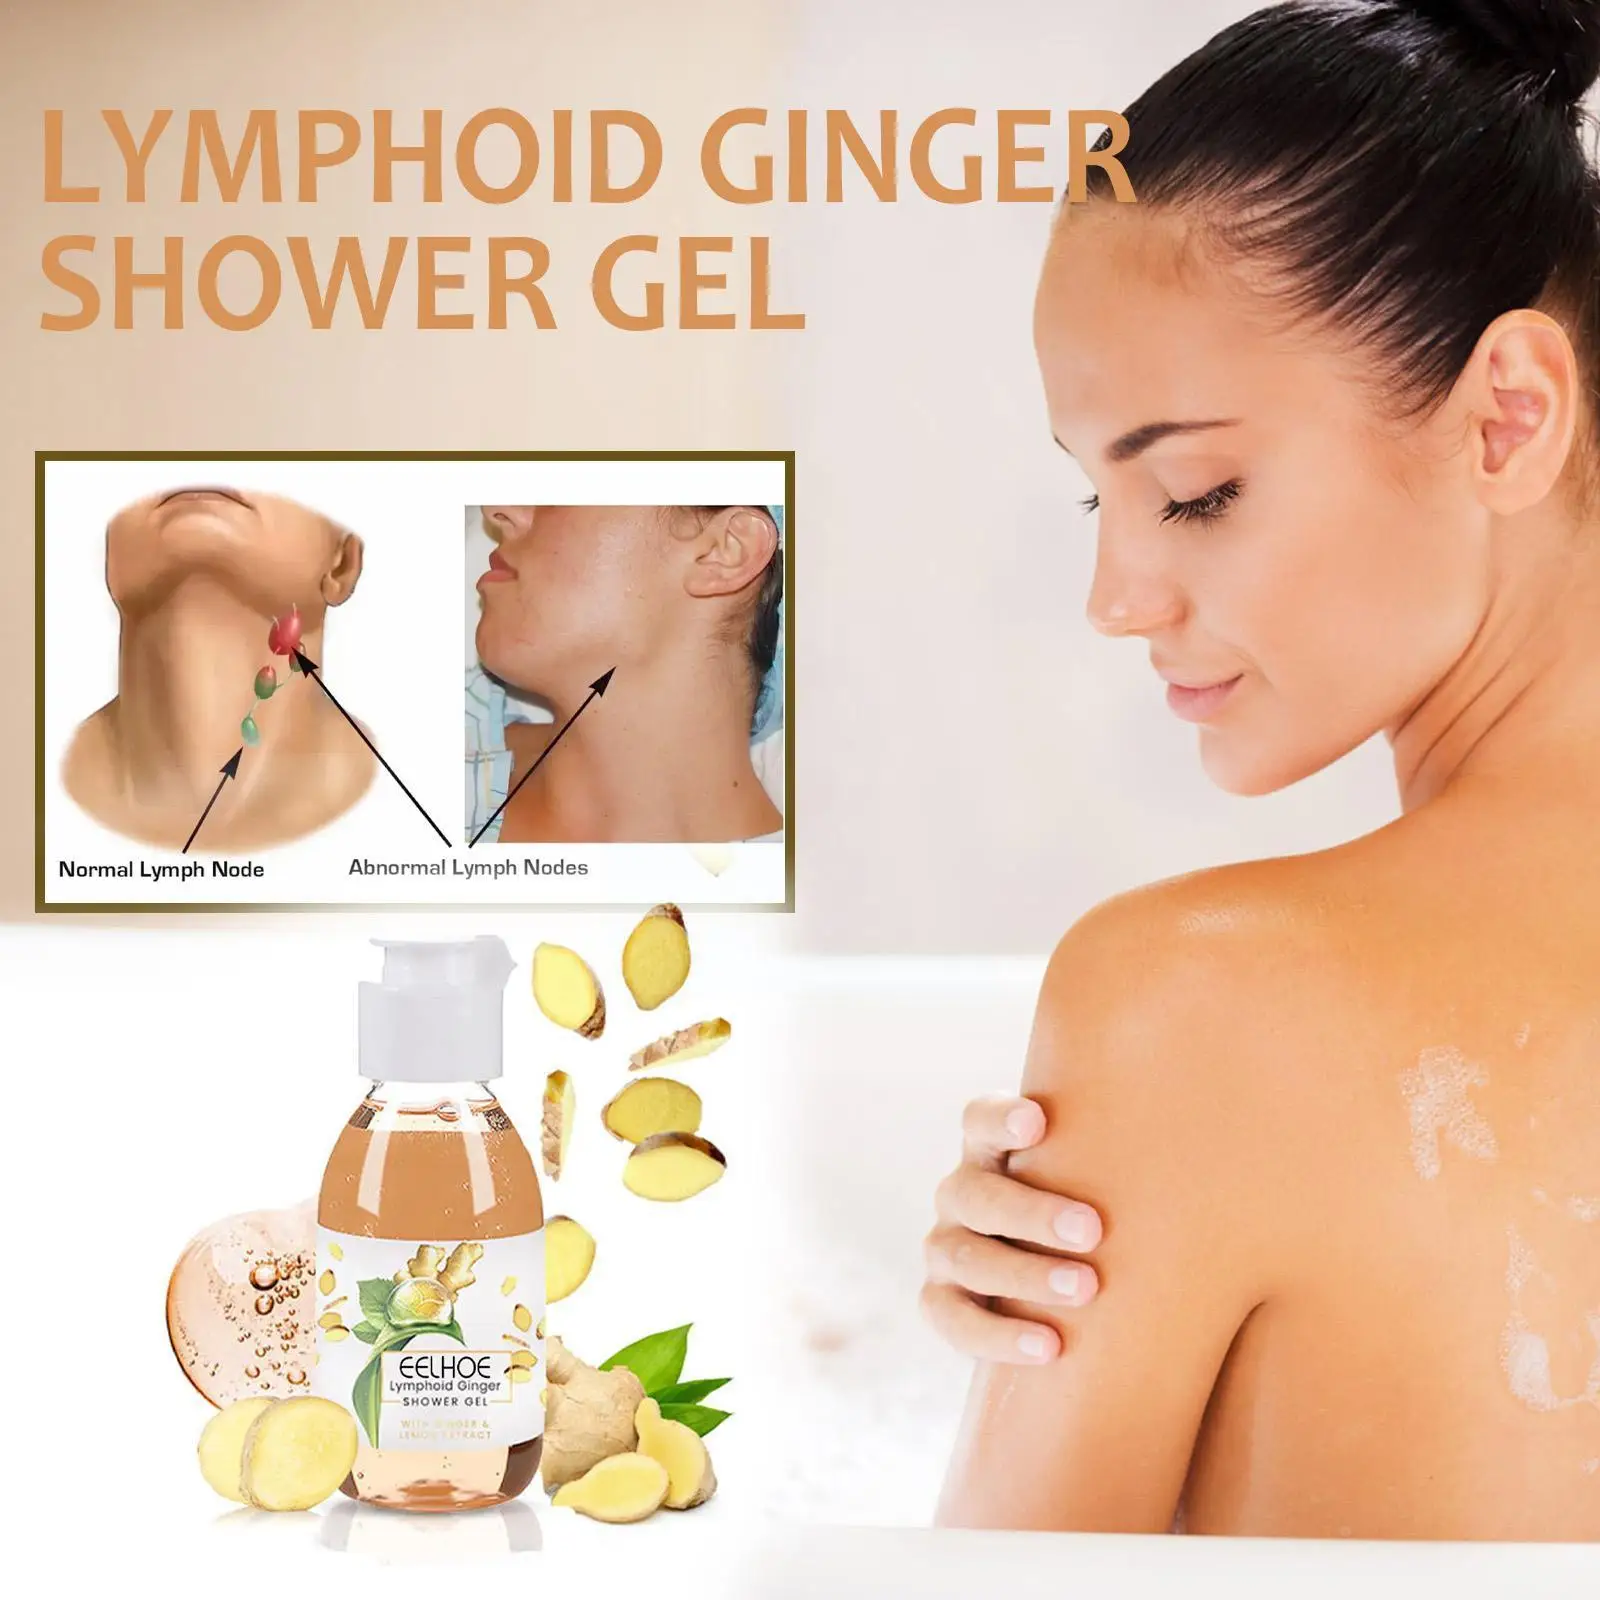 

Lymphatic Drainage Ginger Shower Gel Neck Lymph Relief Skin Detox Firm Loss Fat Body Swelling Wash Cleaning Body Slimming H0e8